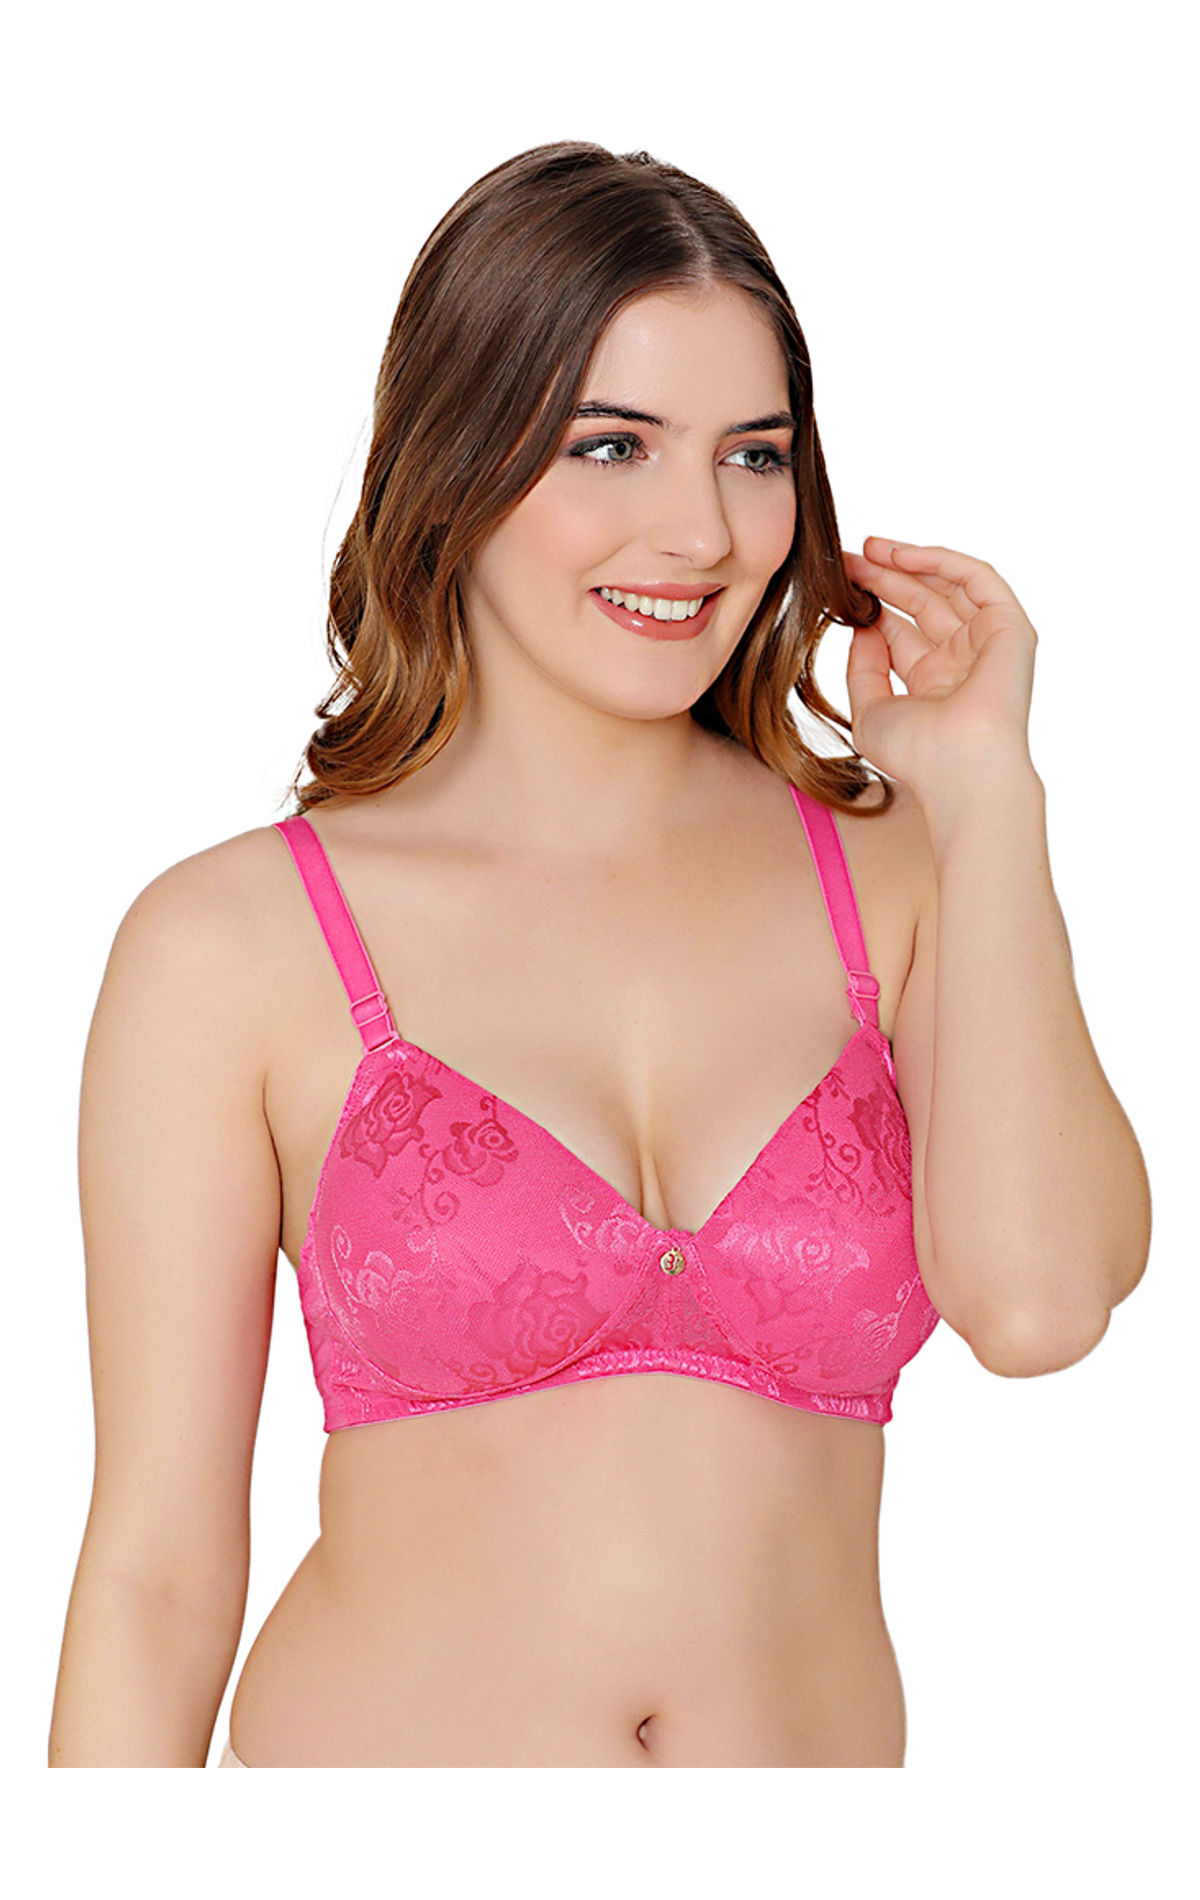 shyaway SY91014 Rose Print Nylon, Spandex Demi Coverage Seamless T-Shirt Bra  (34C, Light Pink) in Chennai at best price by Genxlead Retail Pvt Ltd  (Corporate Office) - Justdial